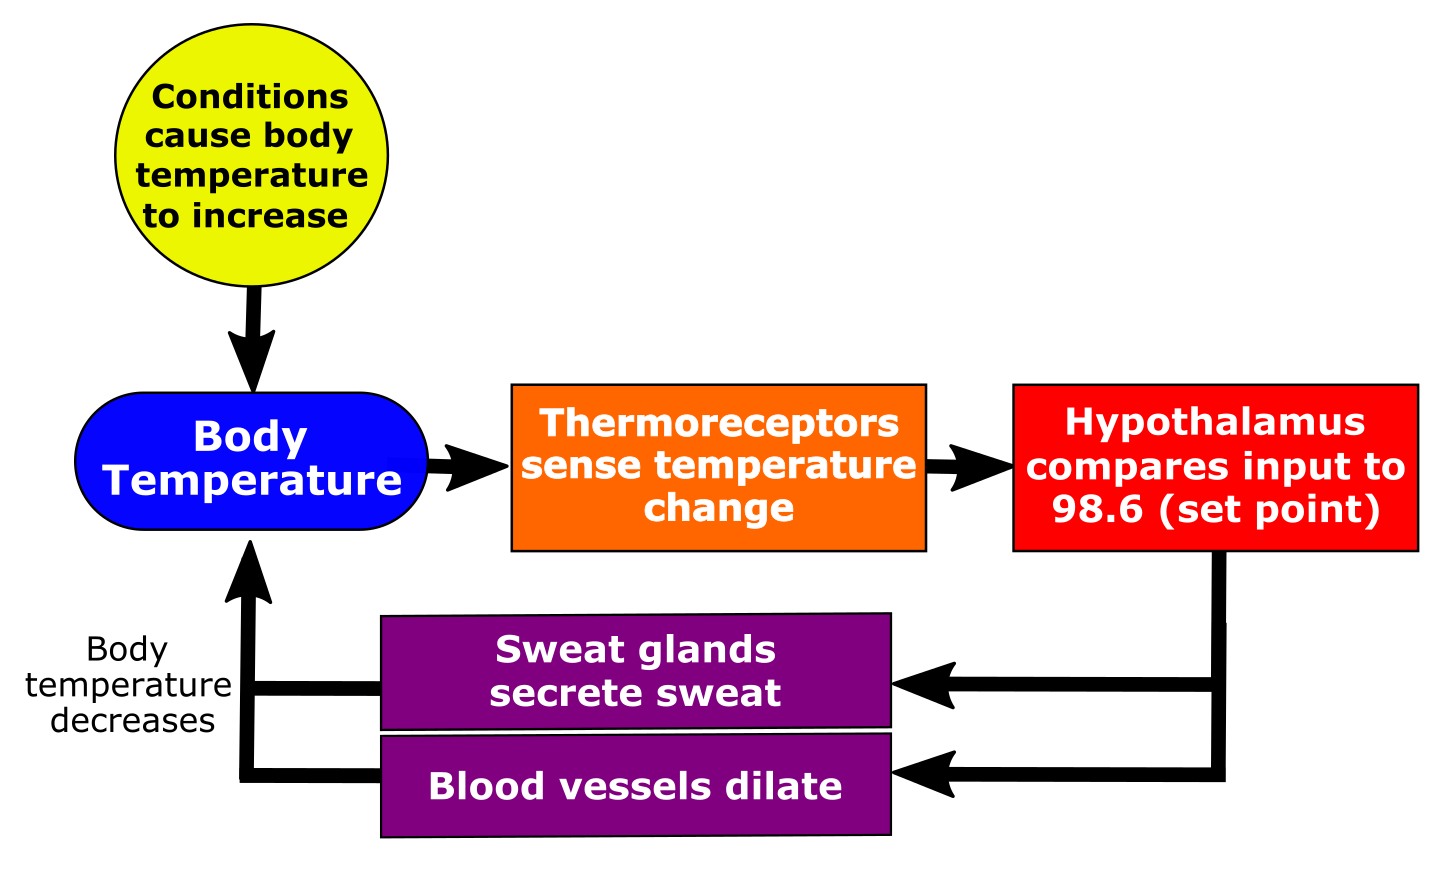 The feedback loop involved in thermoregulation. The components of the feedback loop are in the following order and each component communicates with the next in some way (as a hormonal signal or electrical impulse): Conditions cause body temperature to decrease. This affects body temperature and the change in body temperature is sensed by thermoreceptors. The hypothalamus compares information from the thermoreceptors with the set point. The hypothalamus then communicates with effectors to trigger muscles to shiver and/or for blood vessels to constrict (blood vessels that are closer to the skin surface). Body temperature increases as a result of these effectors and the cycle is repeated until the ideal internal condition is reached.